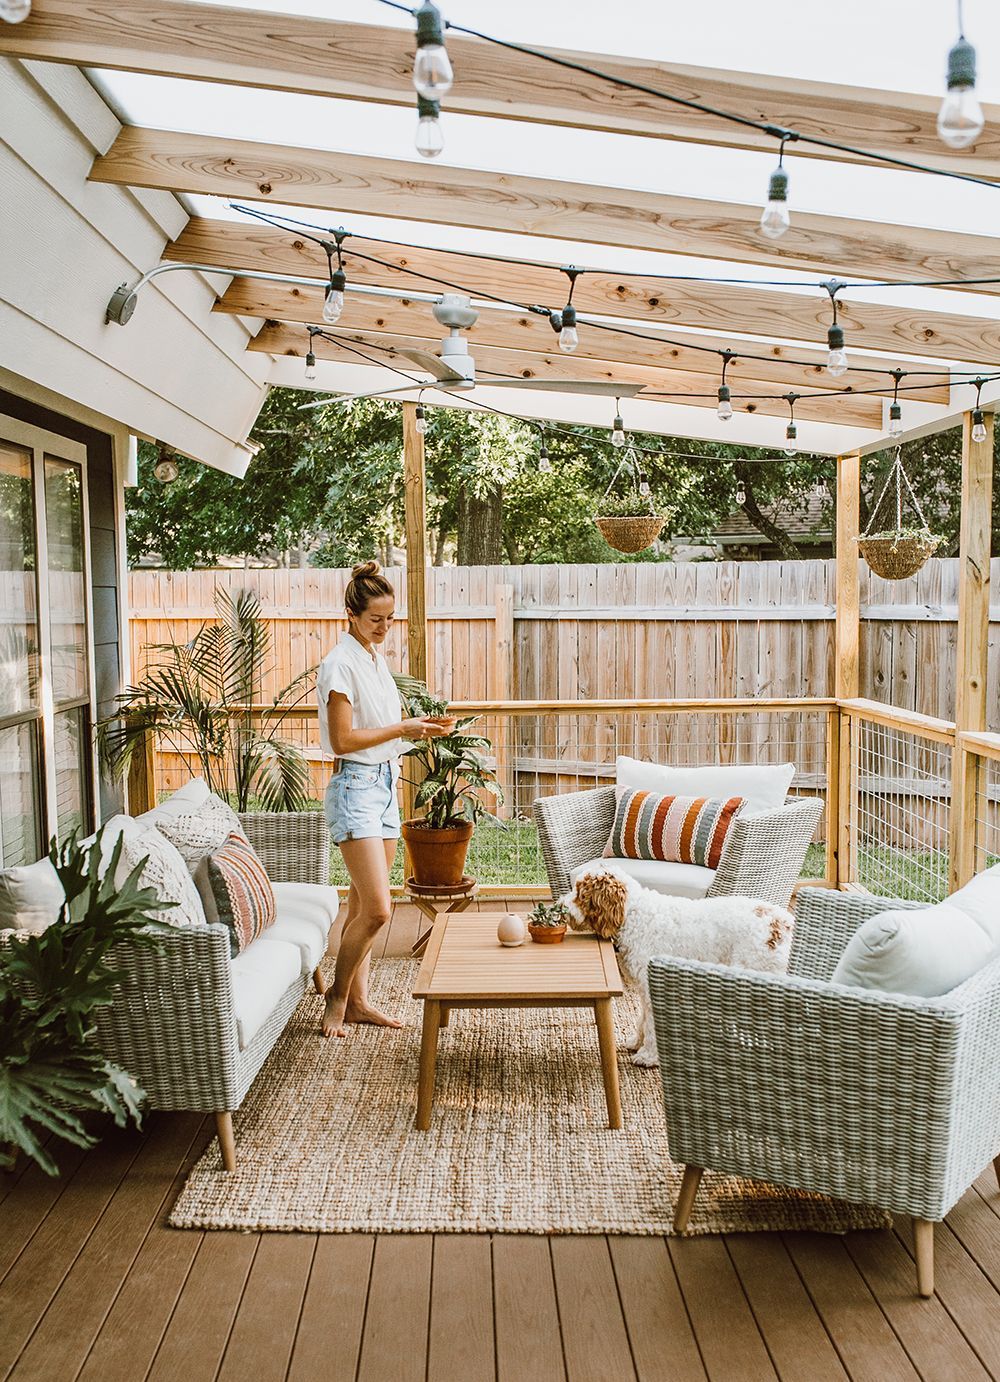 Before & After Patio Renovation REVEAL | LivvyLand -   24 outdoor decor patio
 ideas